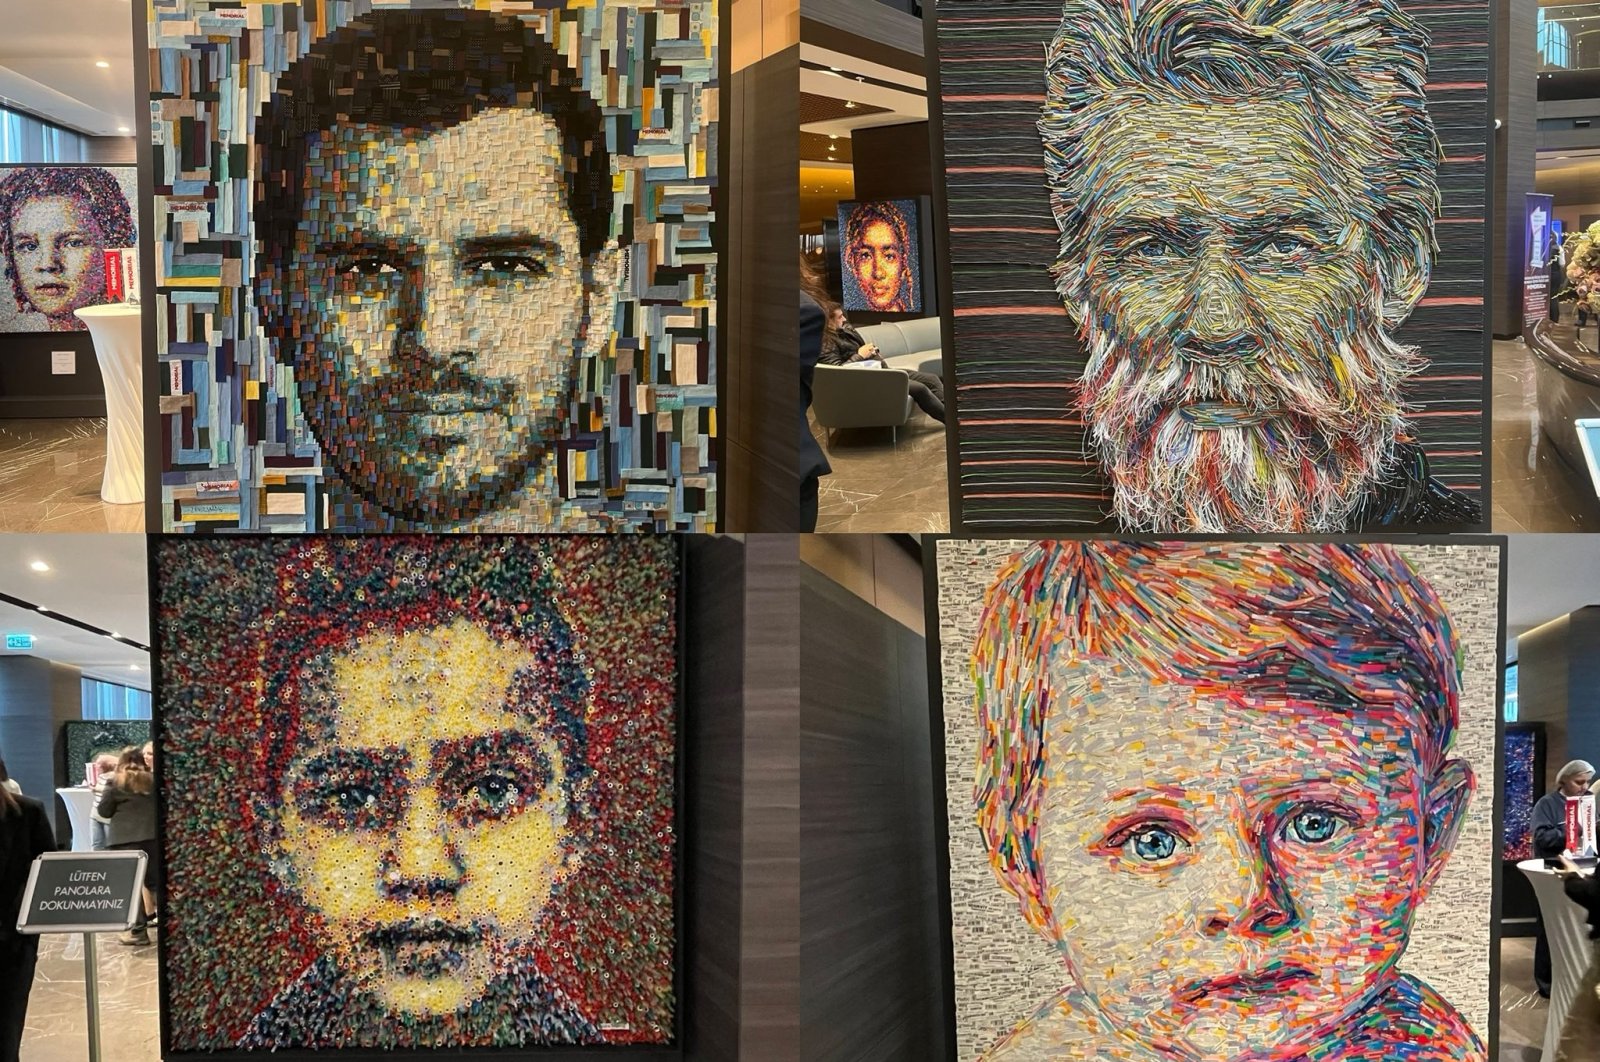 A frame capturing portraits meticulously crafted from various medical waste in the "Art Heals" themed exhibition, Istanbul, Türkiye, Jan. 11, 2024. (Photo by Betül Tilmaç)